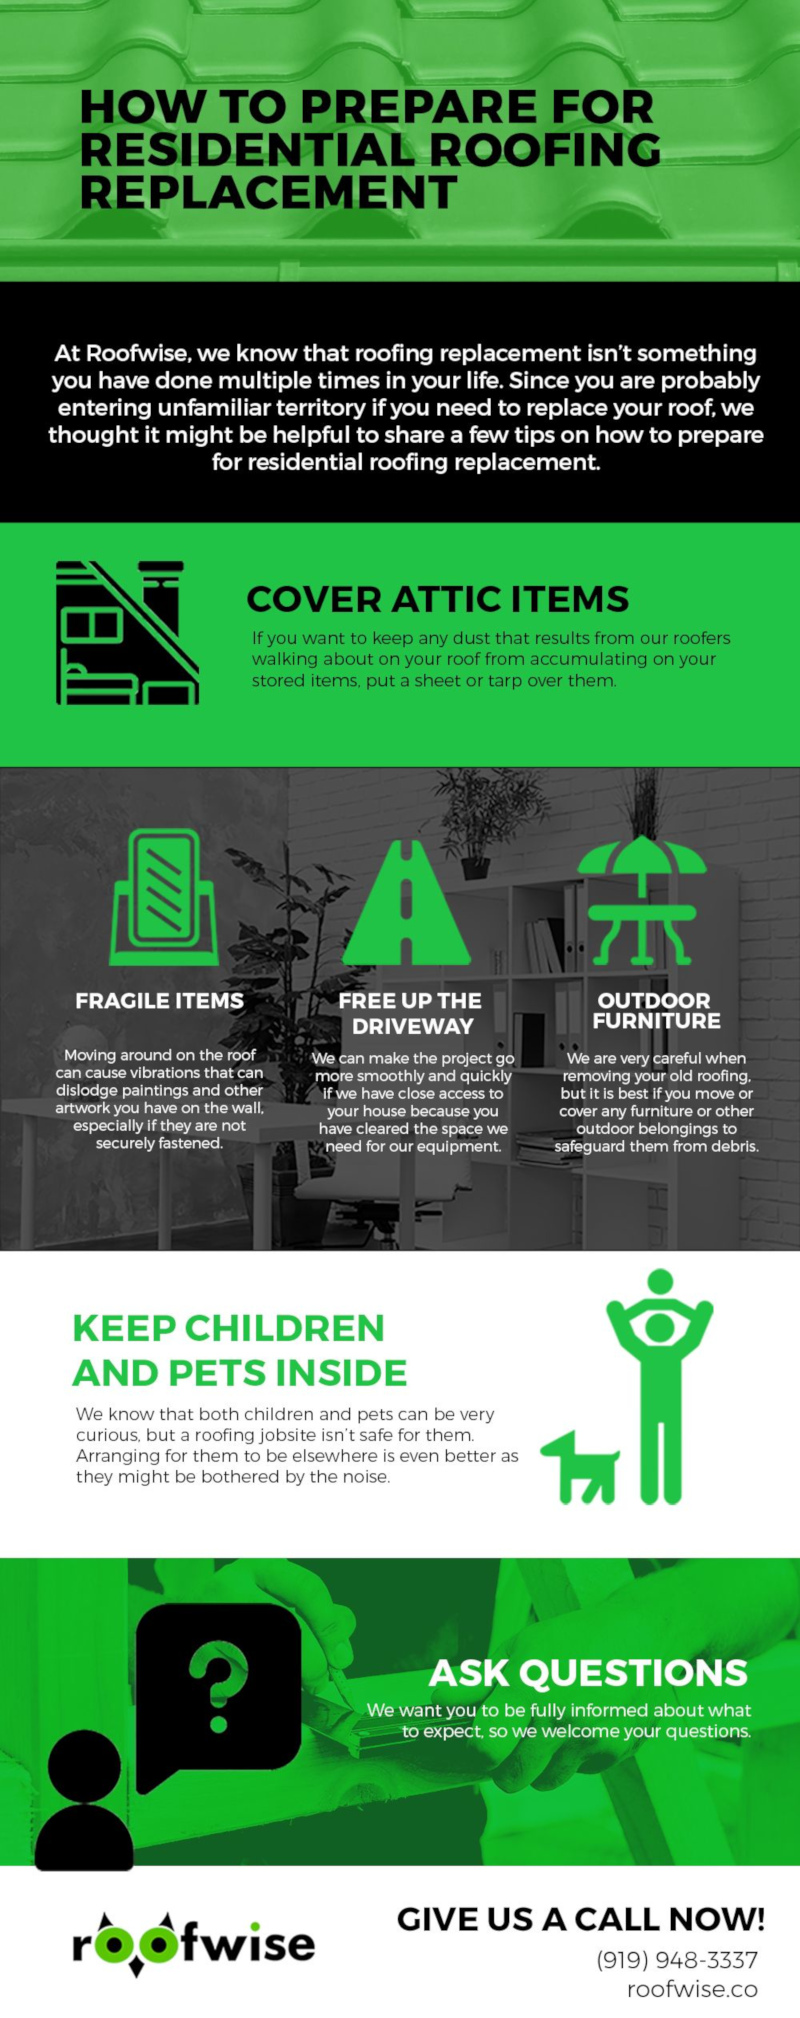 How to Prepare for Residential Roofing Replacement [infographic]